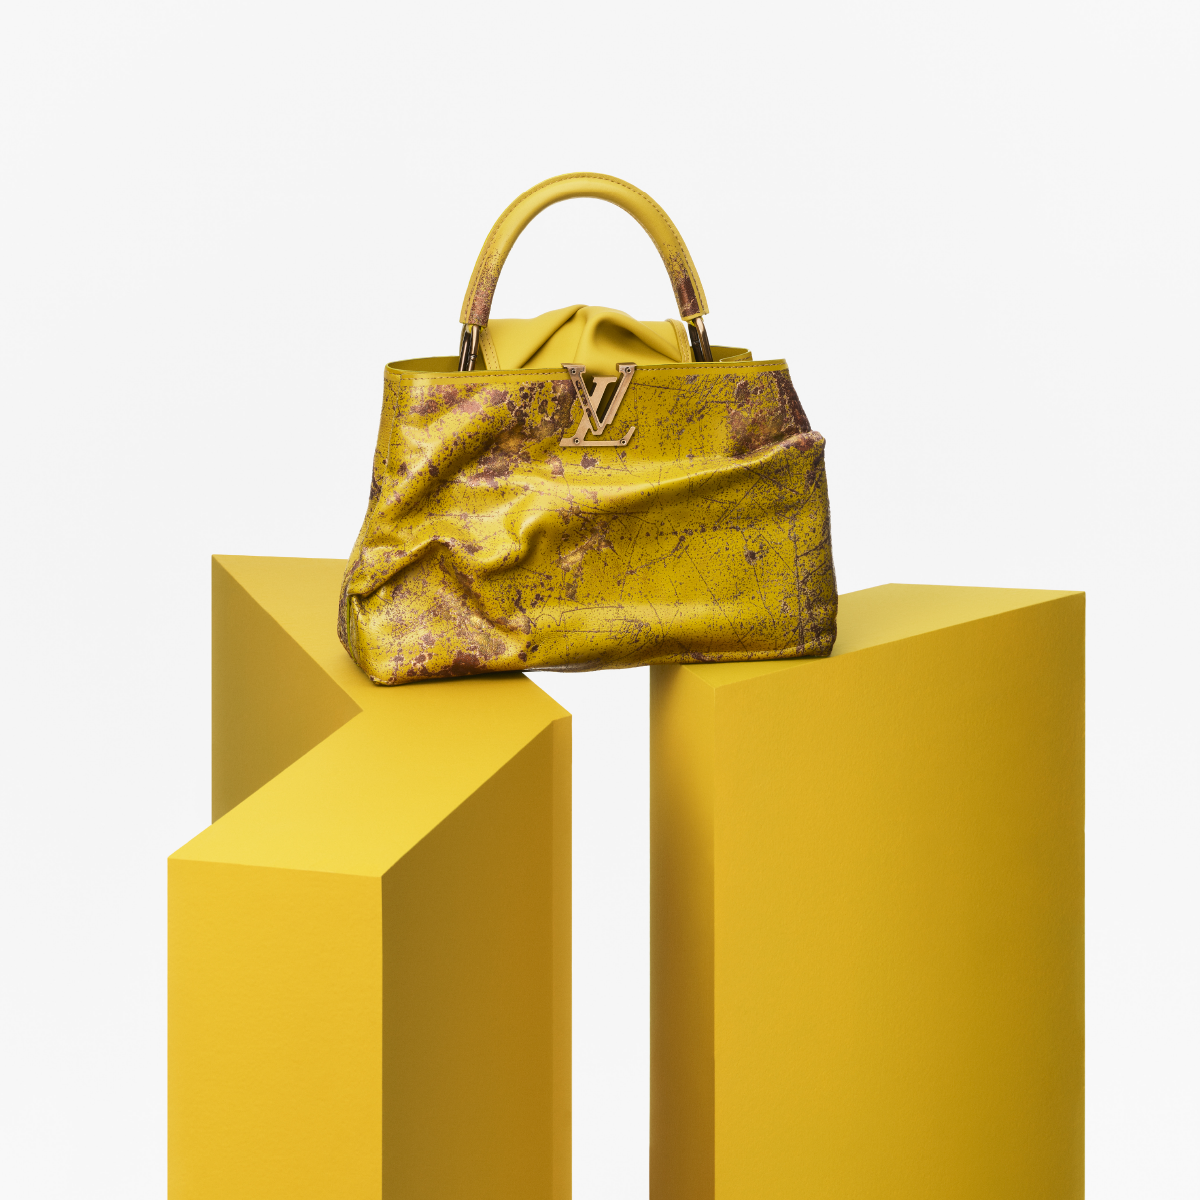 Six more internationally-renowned artists reinvent a Louis Vuitton